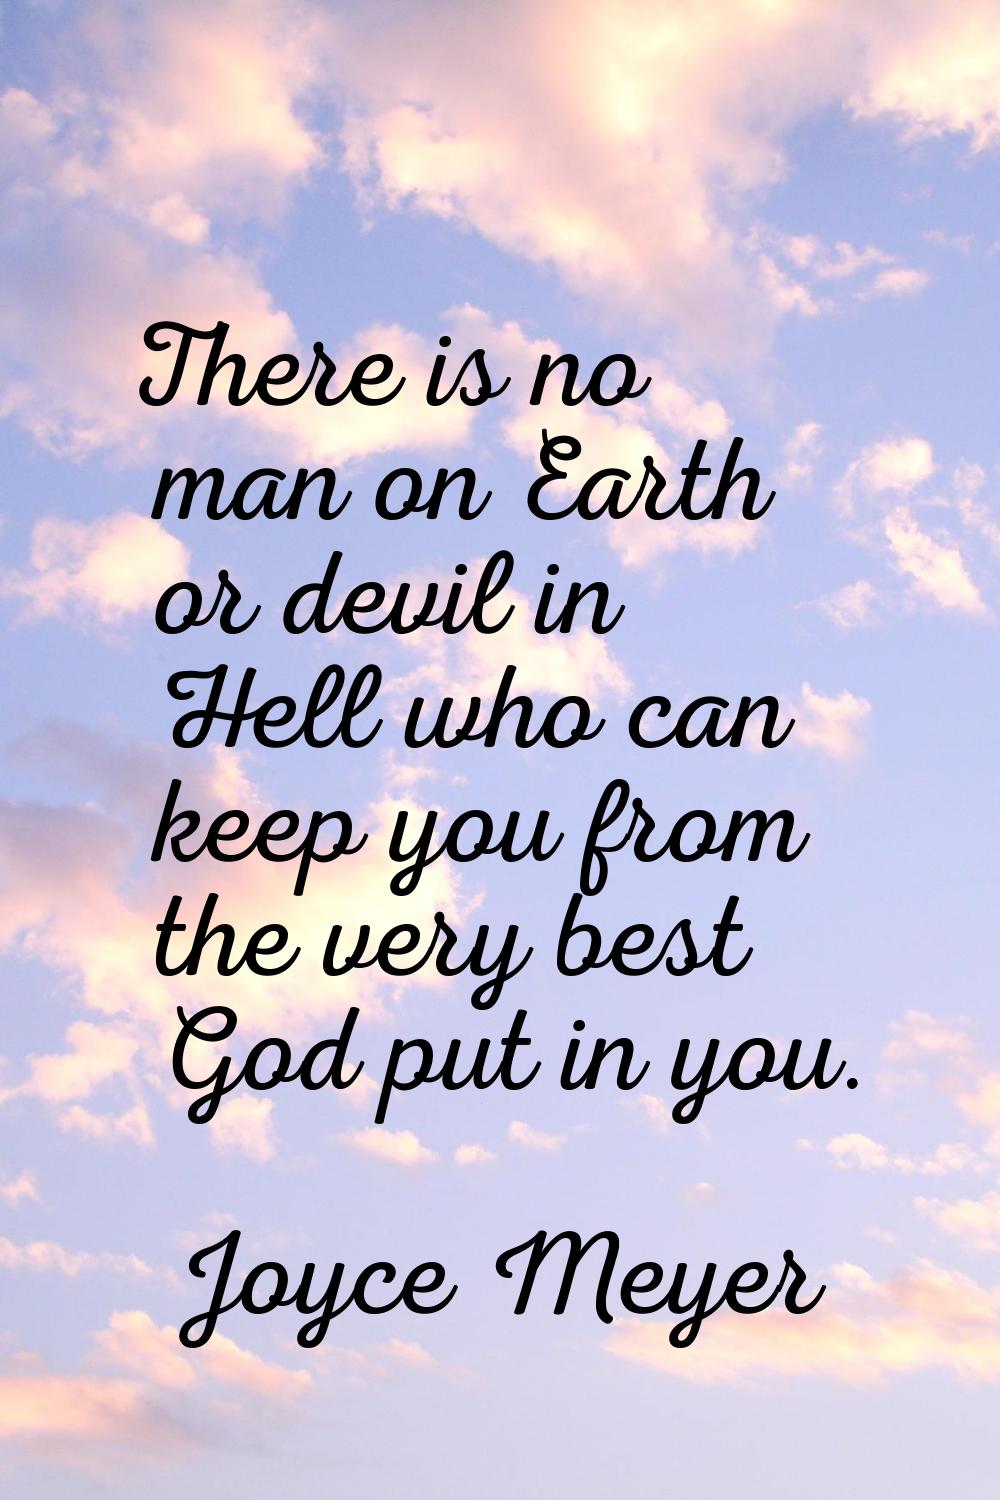 There is no man on Earth or devil in Hell who can keep you from the very best God put in you.